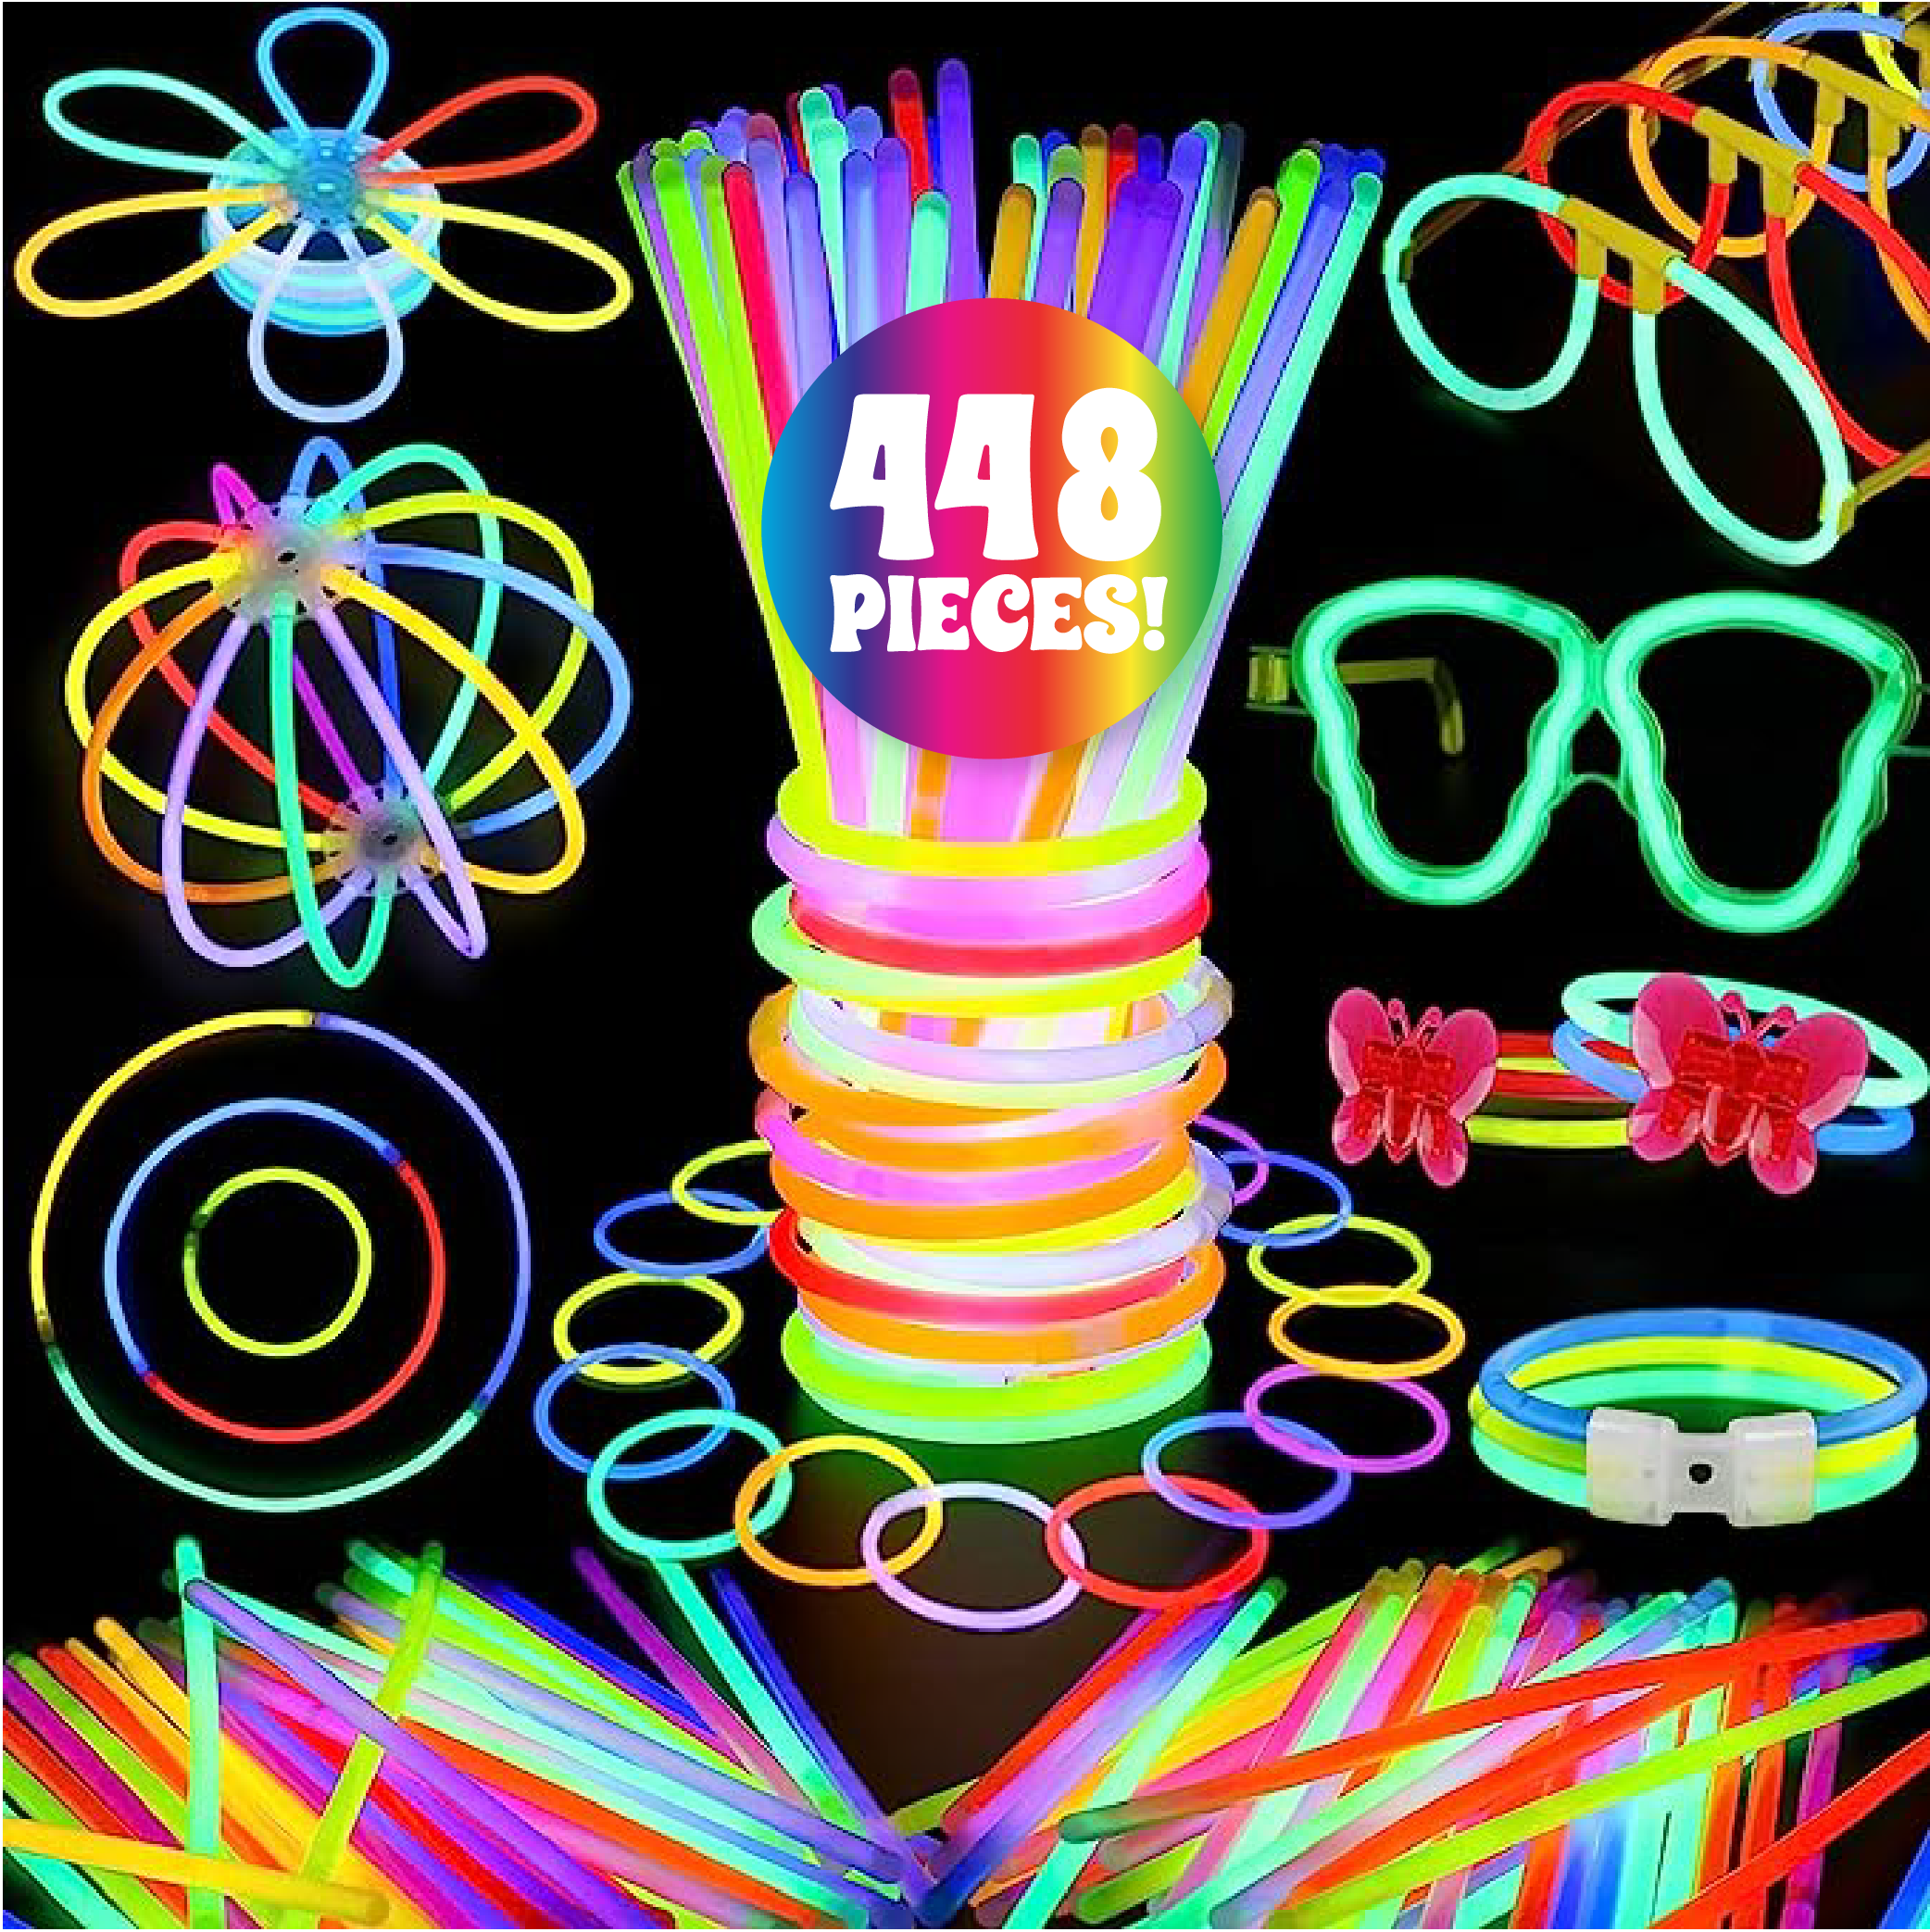 Kaitek Glow Sticks Party Favor - 448 Pcs for Halloween Neon Theme, Glow in  the Dark Party Combo Pack 